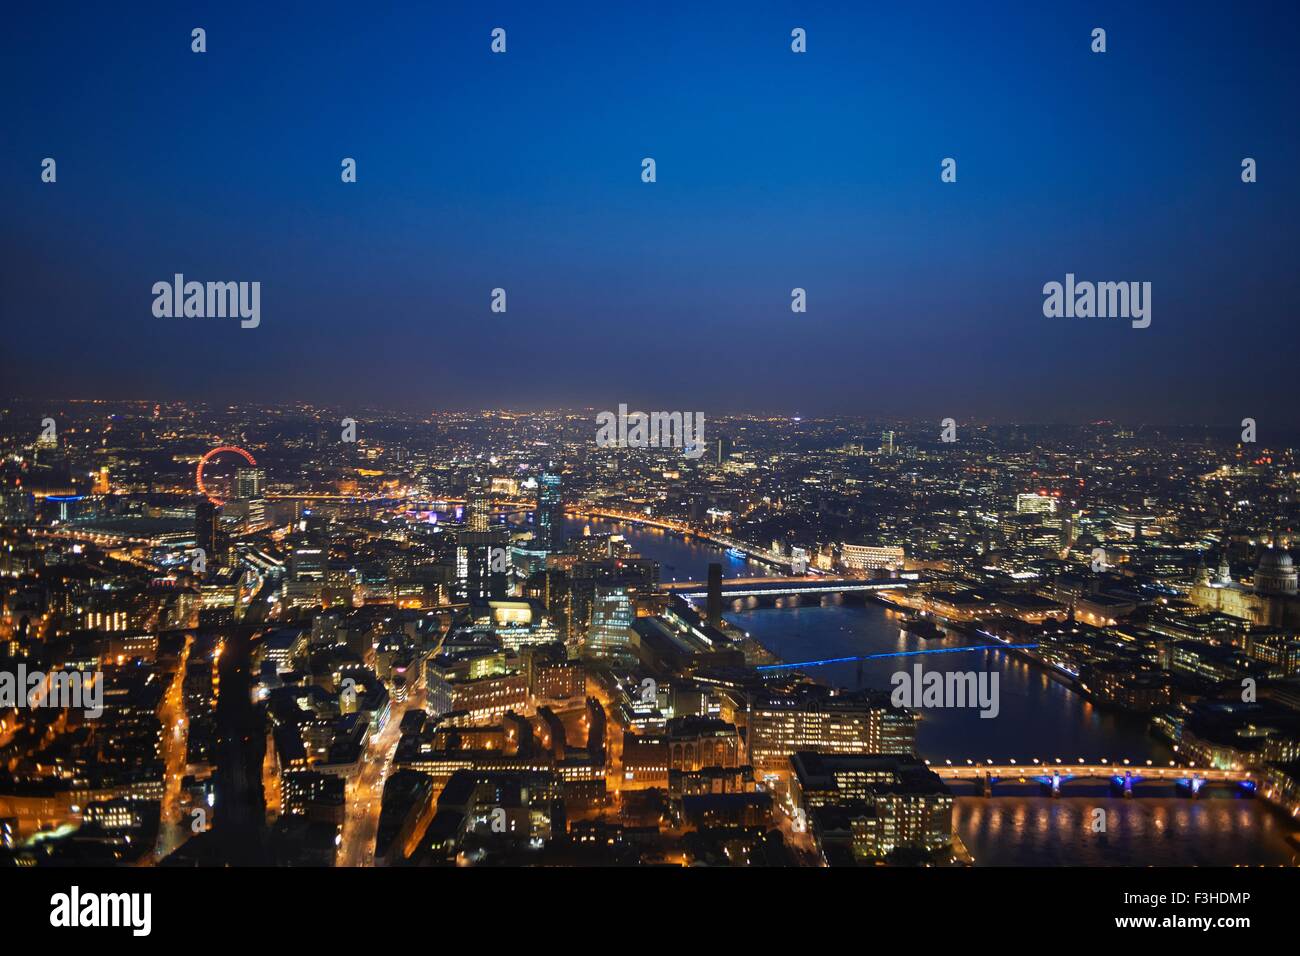 Aerial cityscape of river Thames at night, London, England, UK Stock Photo